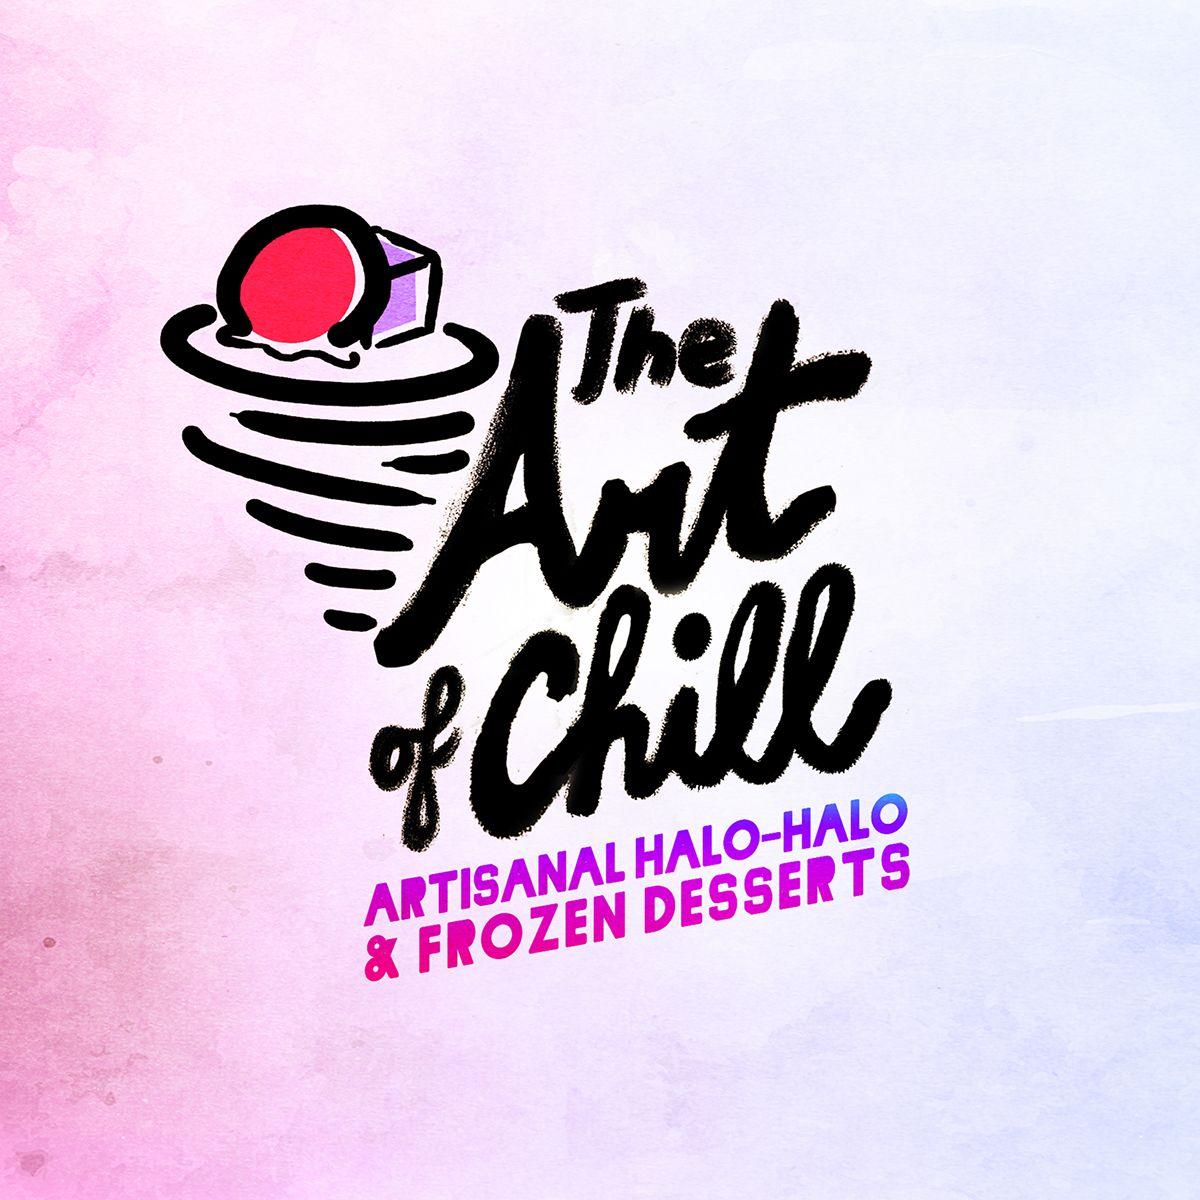 Chill Logo - The Art Of Chill Logo on Pantone Canvas Gallery